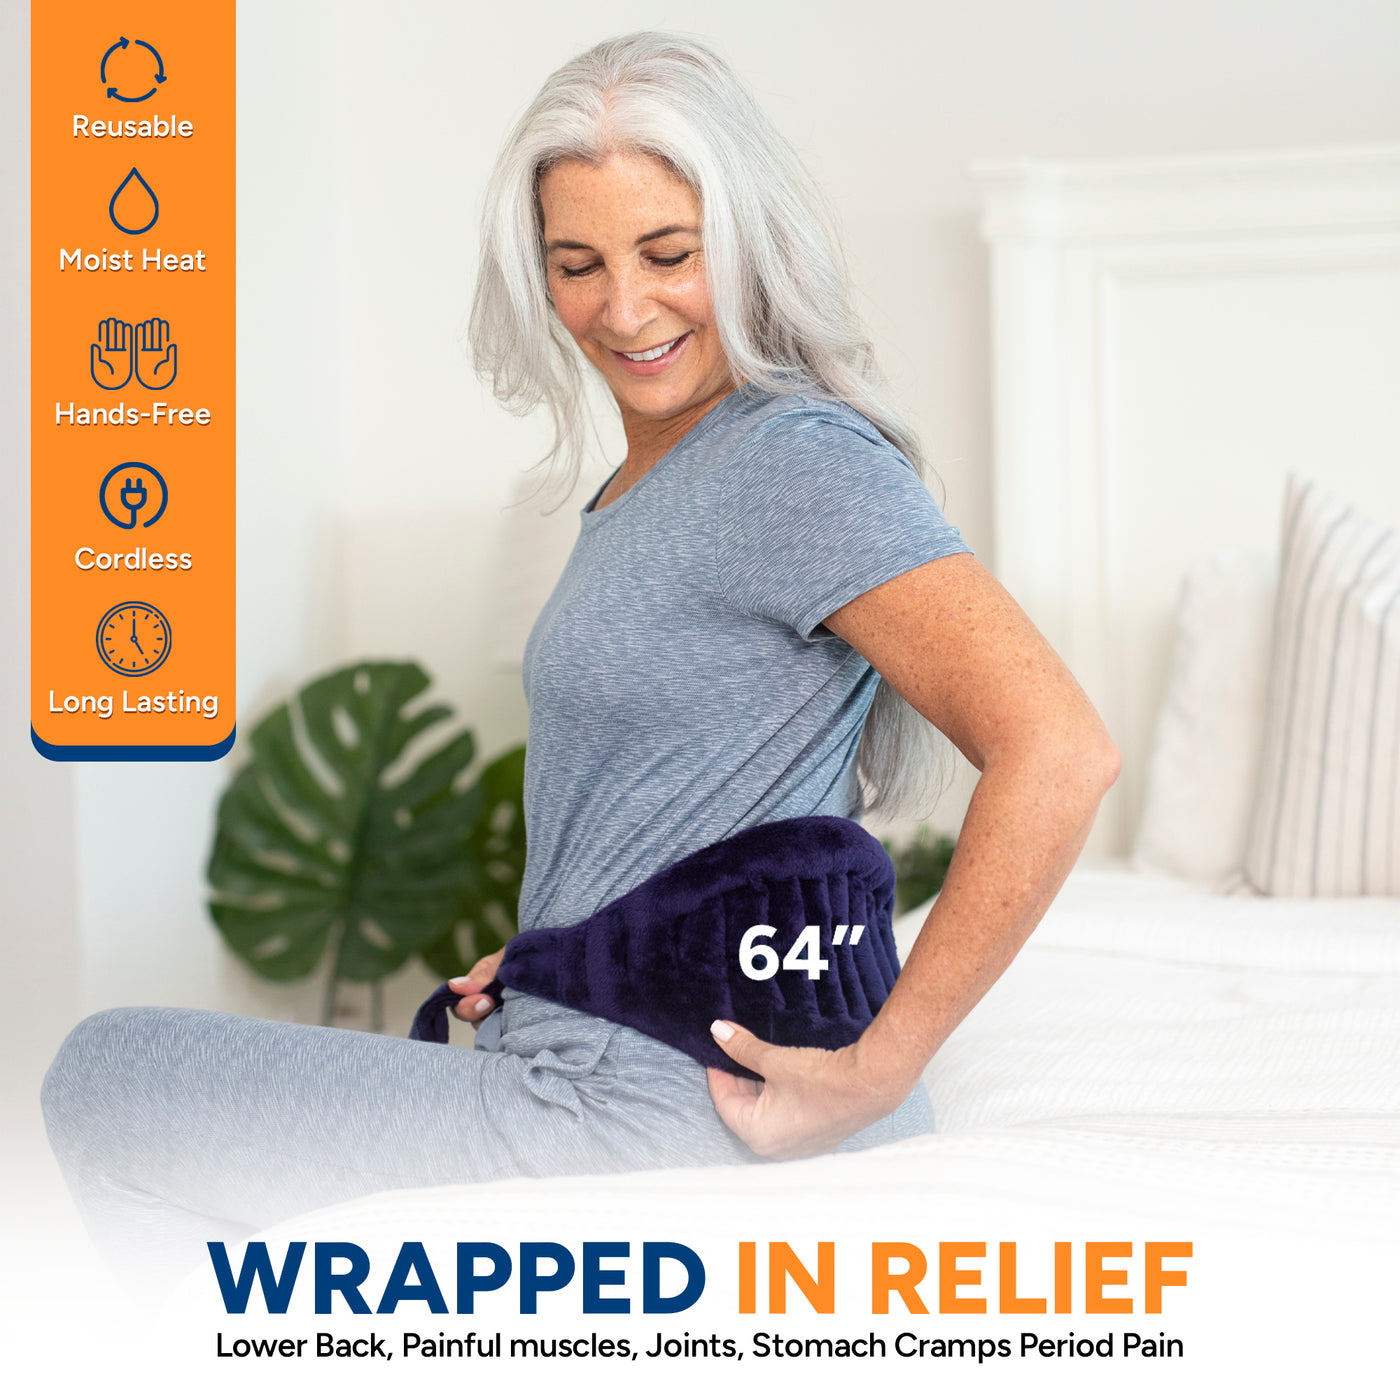 Lower Back Heat Wrap for Back Pain Relief - Size Small Purple